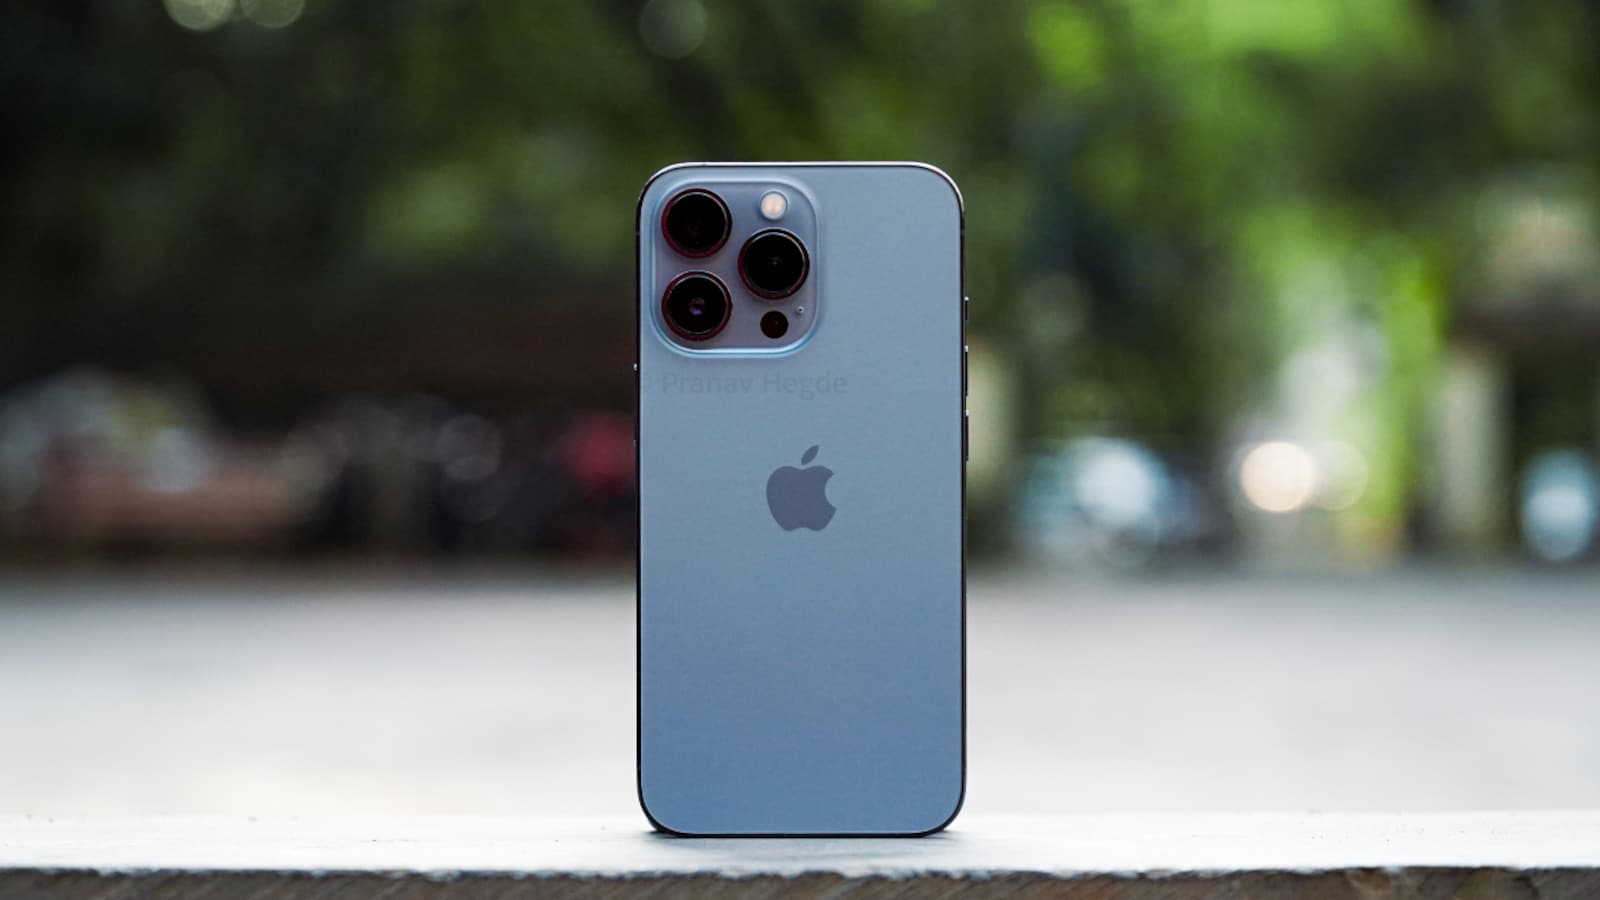 iPhone 13 Pro, iPhone 13 Pro Max drop test shows these are tough